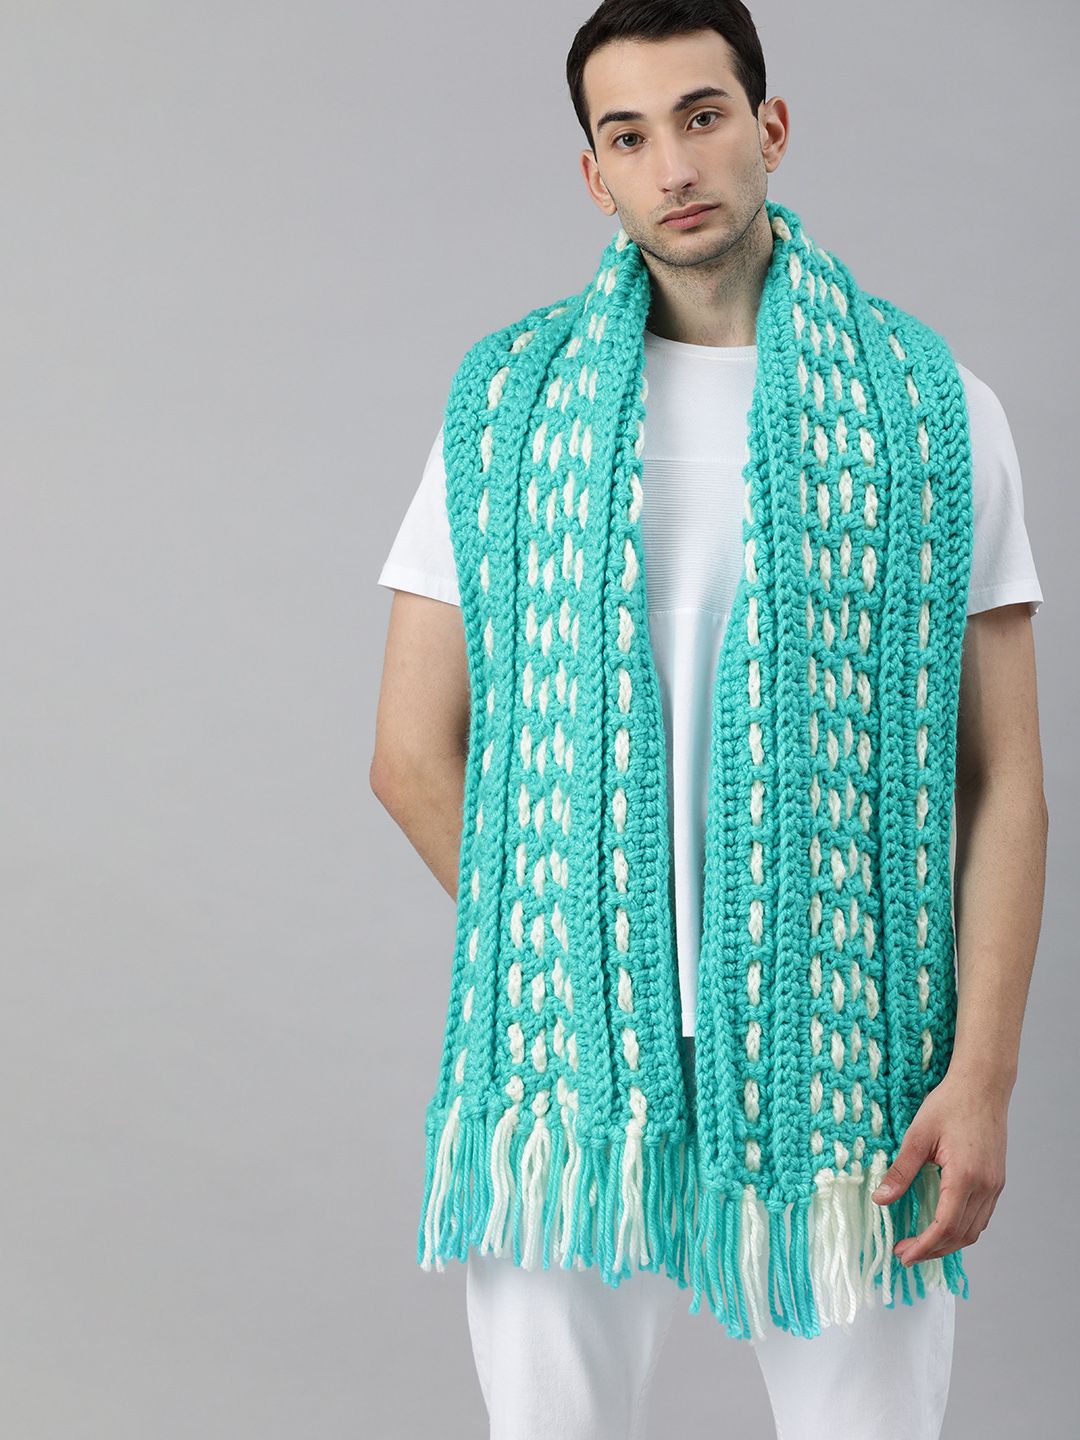 Magic Needles Unisex Turquoise Blue & White Self Design Knitted Scarf with Tassels Price in India